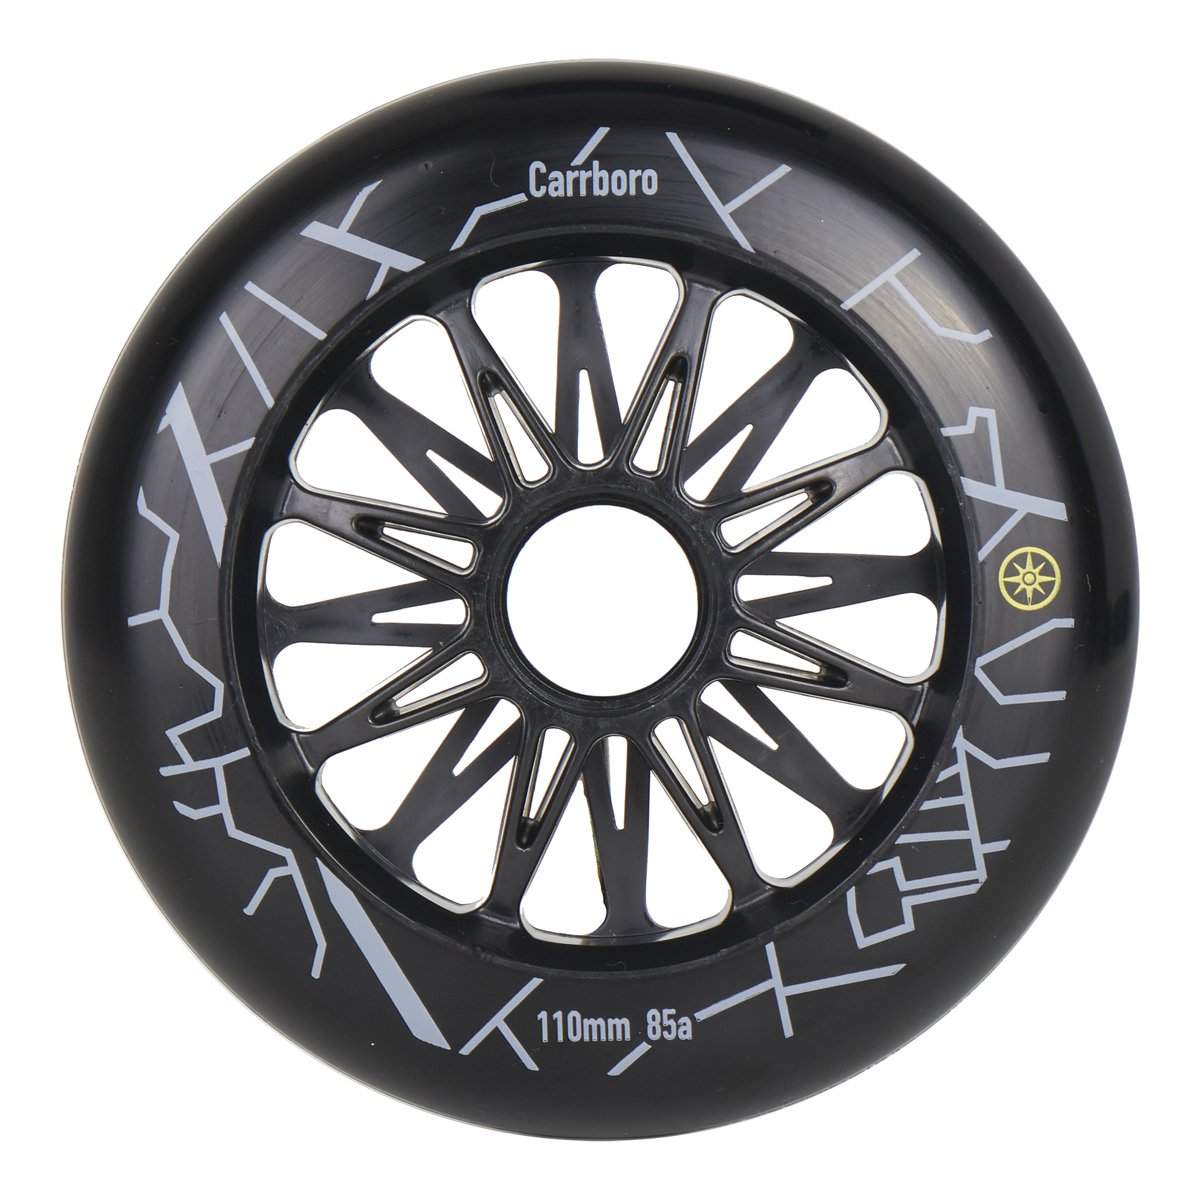 Compass Carrboro Wheels 110mm / 85a 6-Pack